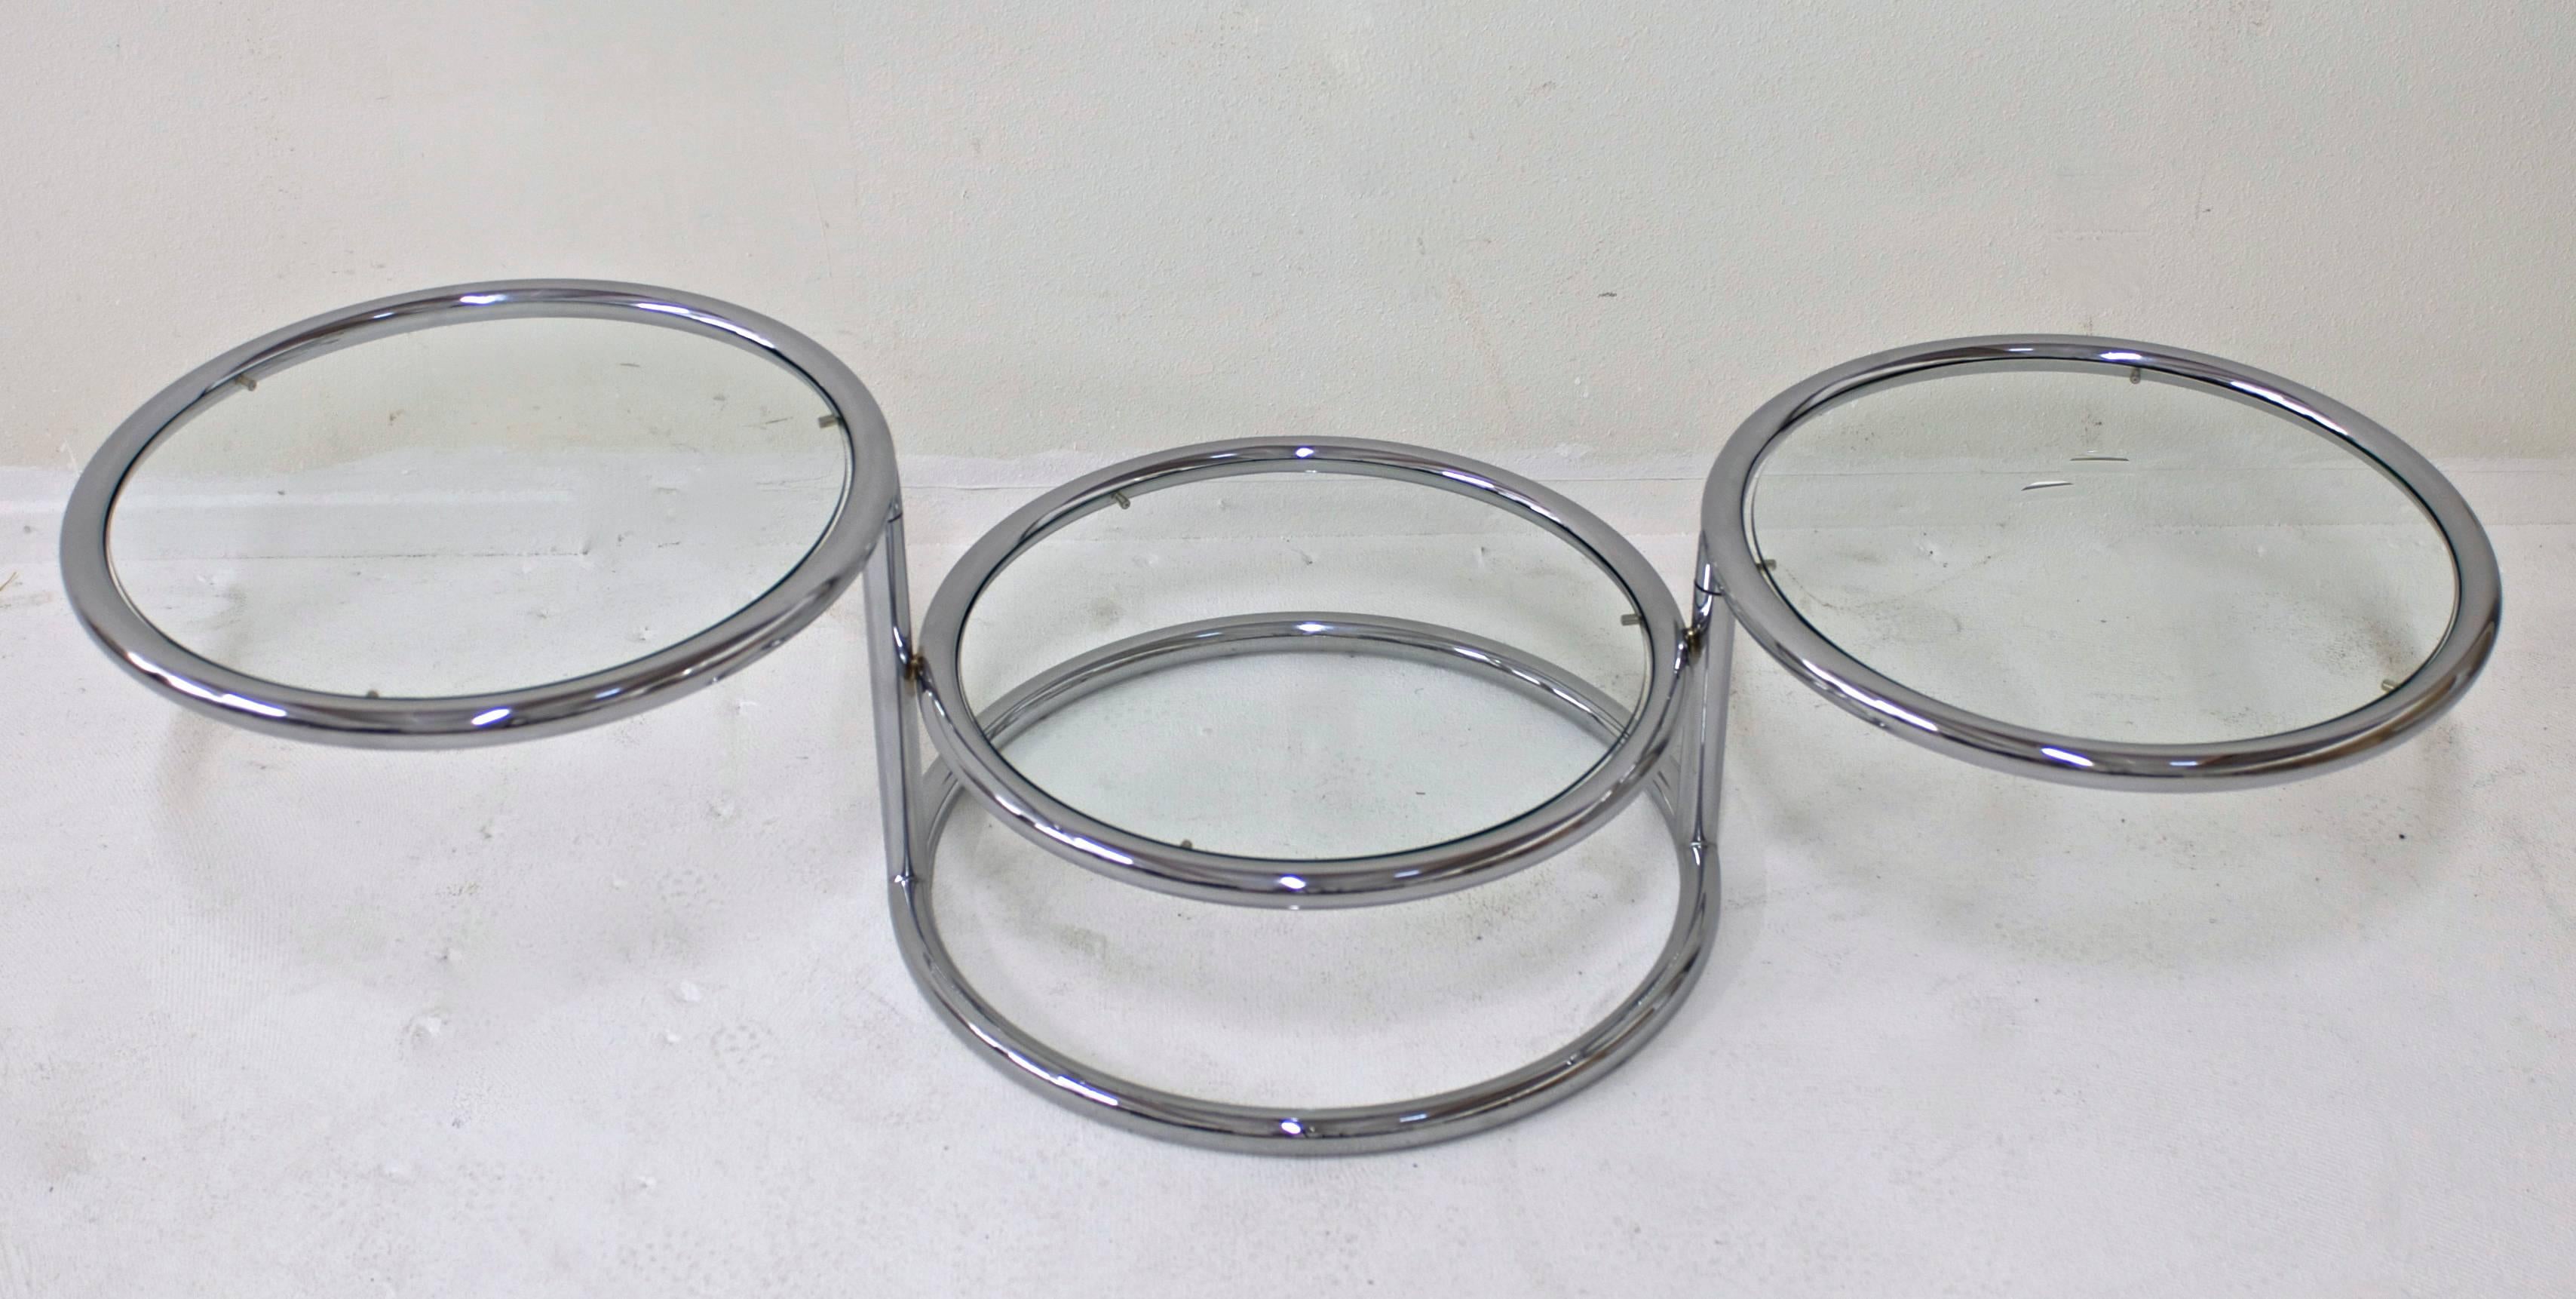 A tubular chrome table that has three glass tiers. The top two can pivot left or right to make a larger cocktail table and when closed it compacts to 24